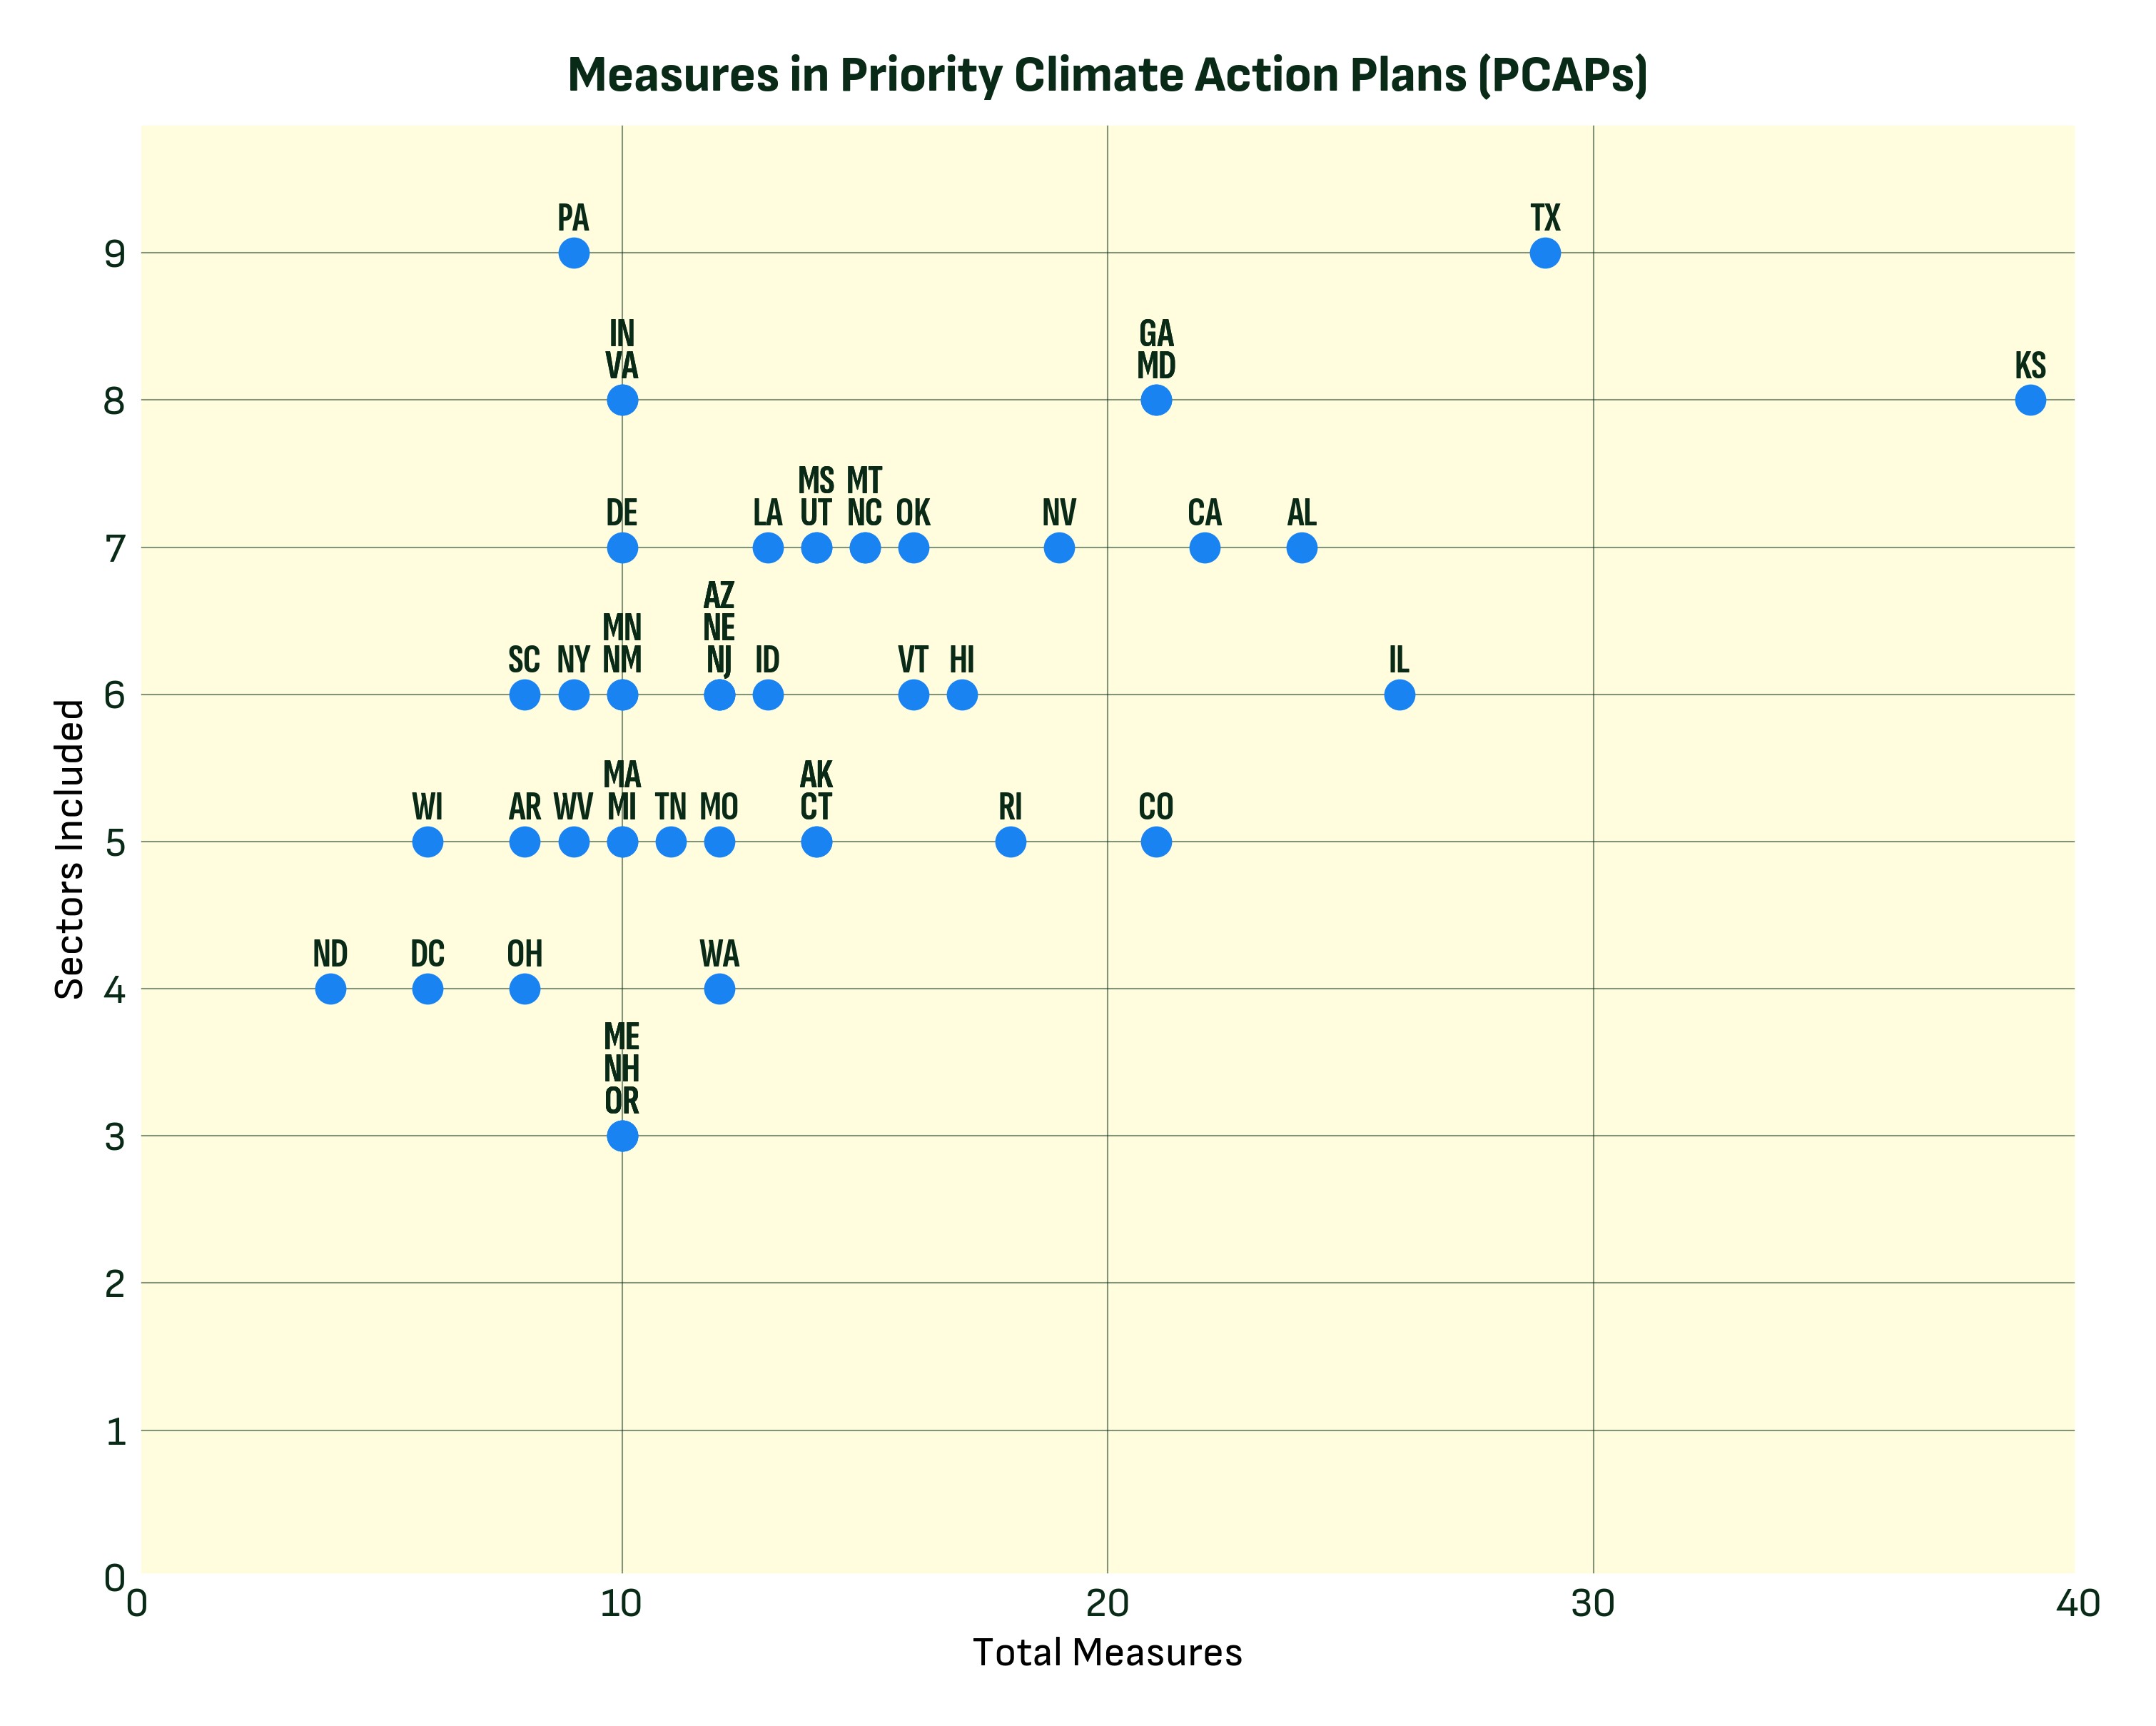 A scatter plot showing the relationship between the number of measures (x-axis) and the number of sectors included (y-axis) in a state's Priority Climate Action Plan. The trend is that as measures increase, so do sectors.